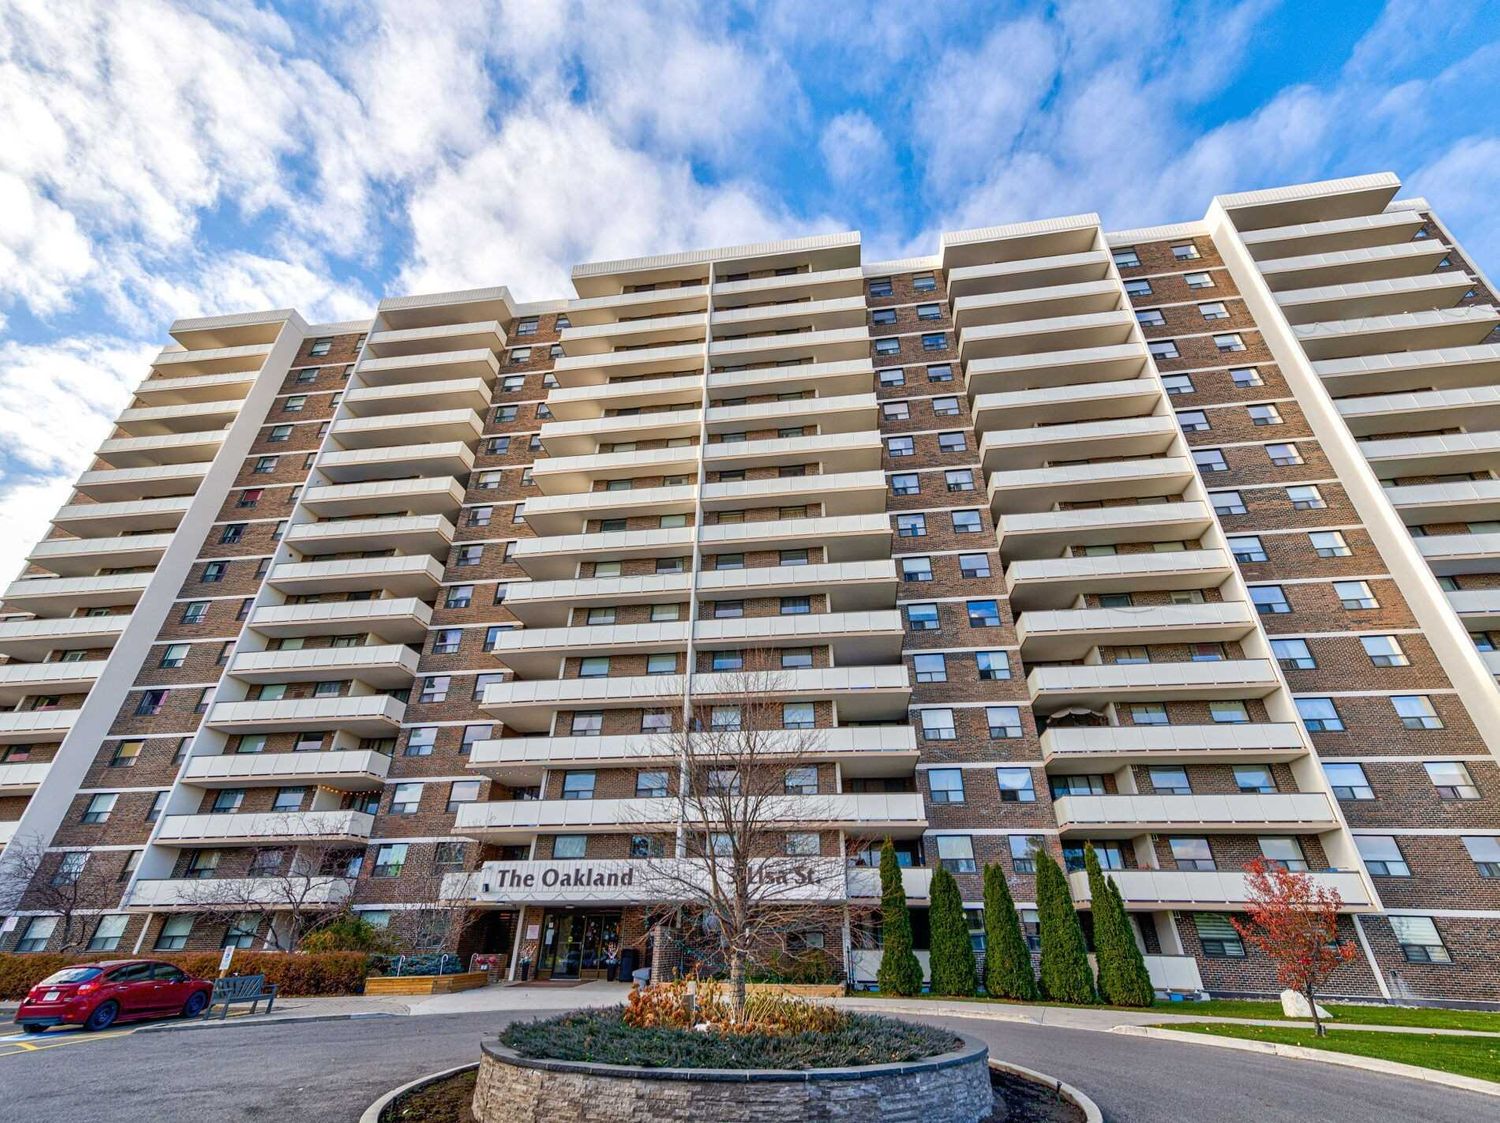 3 Lisa Street. The Oakland Condos is located in  Brampton, Toronto - image #1 of 2